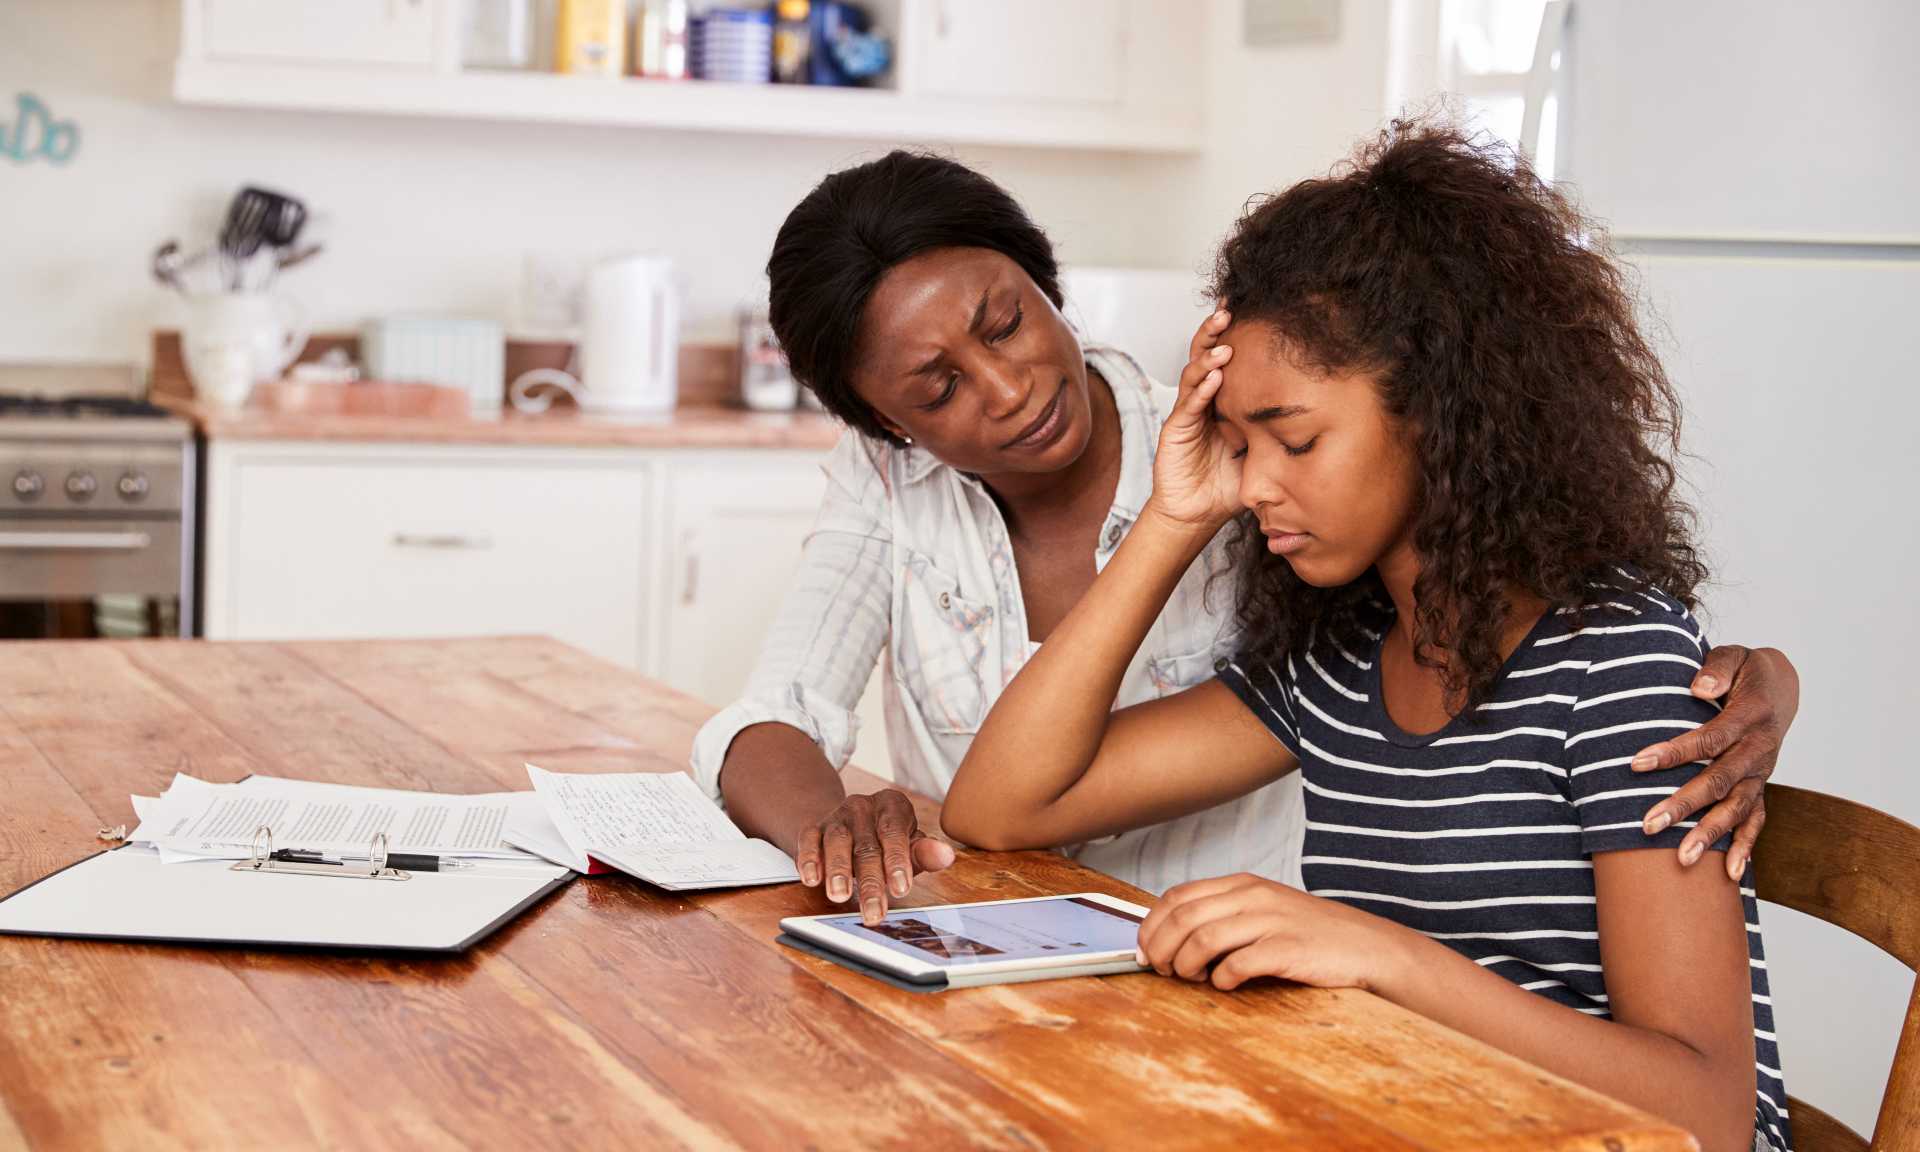 Mom helping stressed teen with schoolwork.